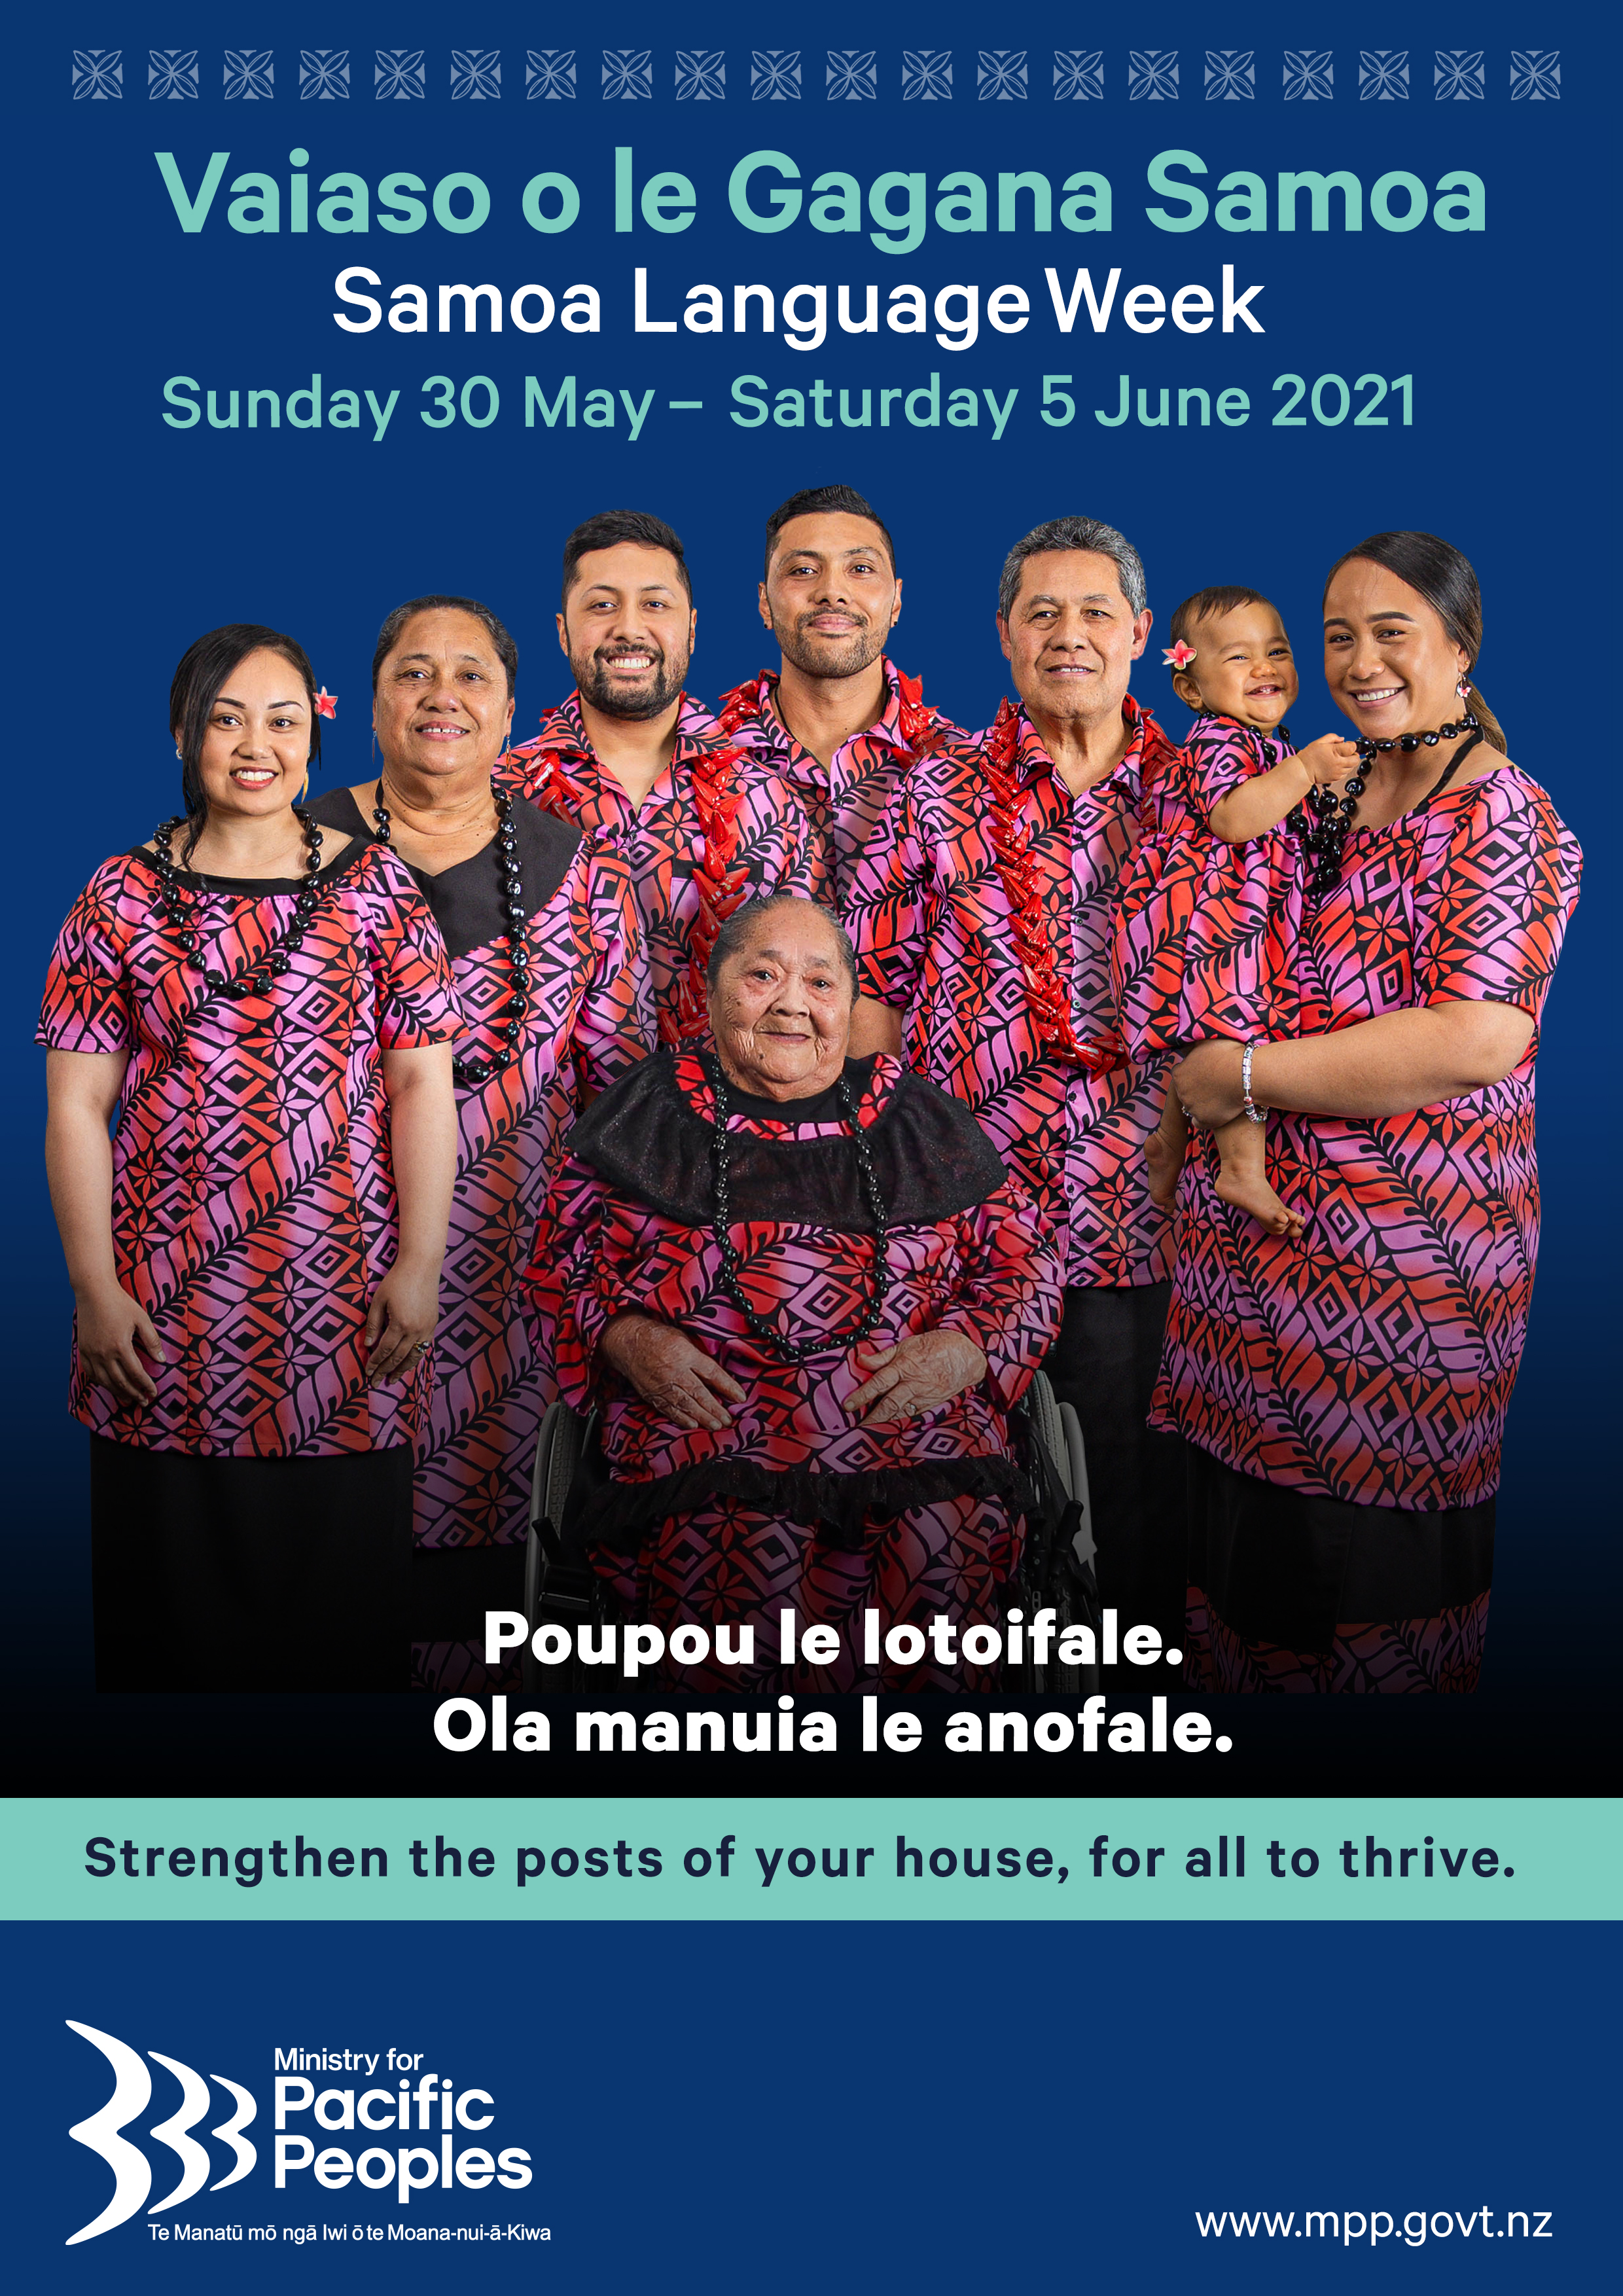 Ministry for Pacific Peoples — Samoa Language Week 2021